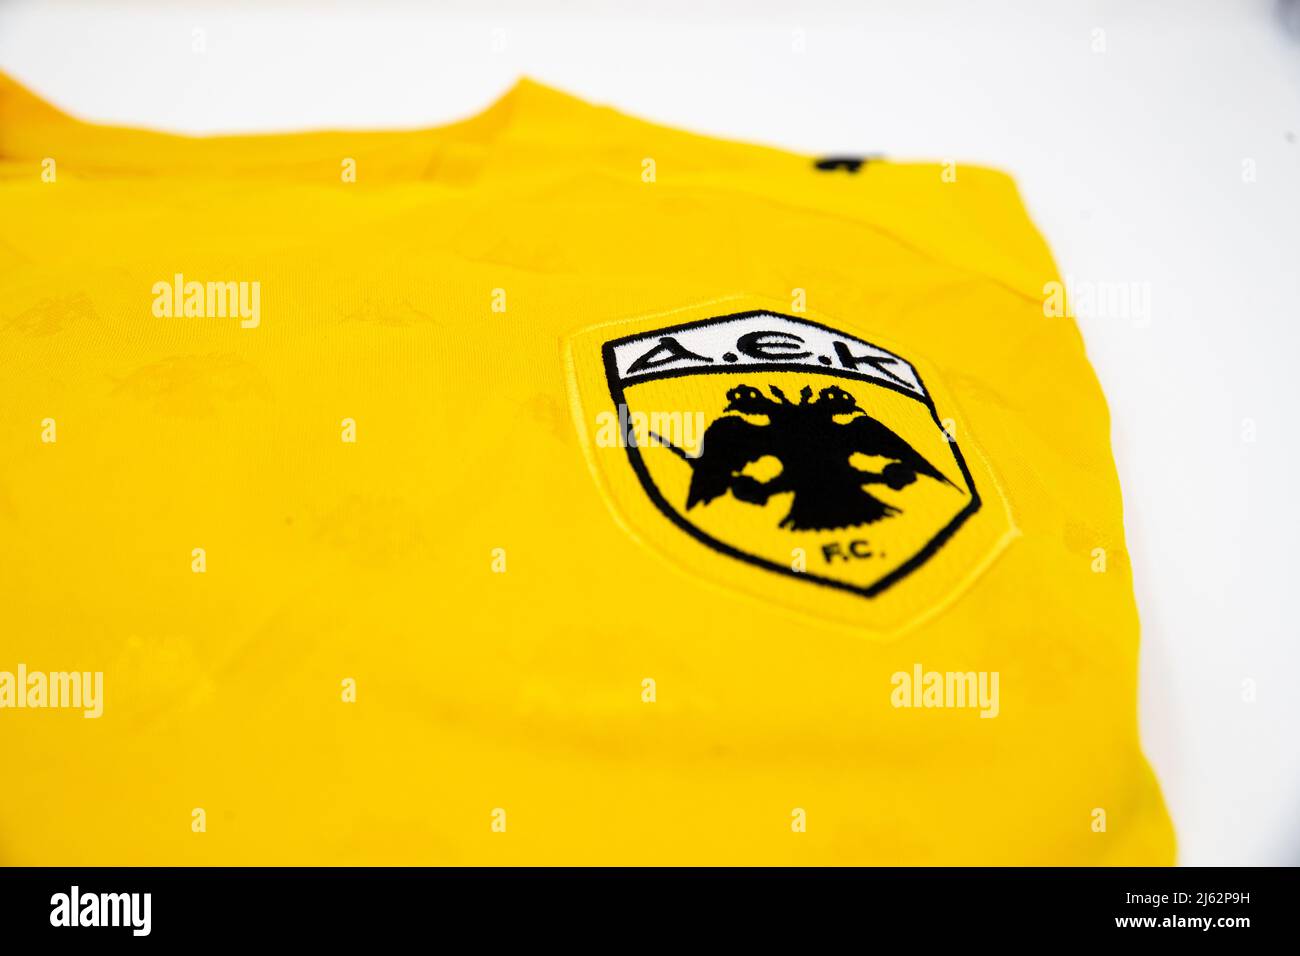 AEK Athens FC badge on the front of a folded yellow puma football shirt  Stock Photo - Alamy